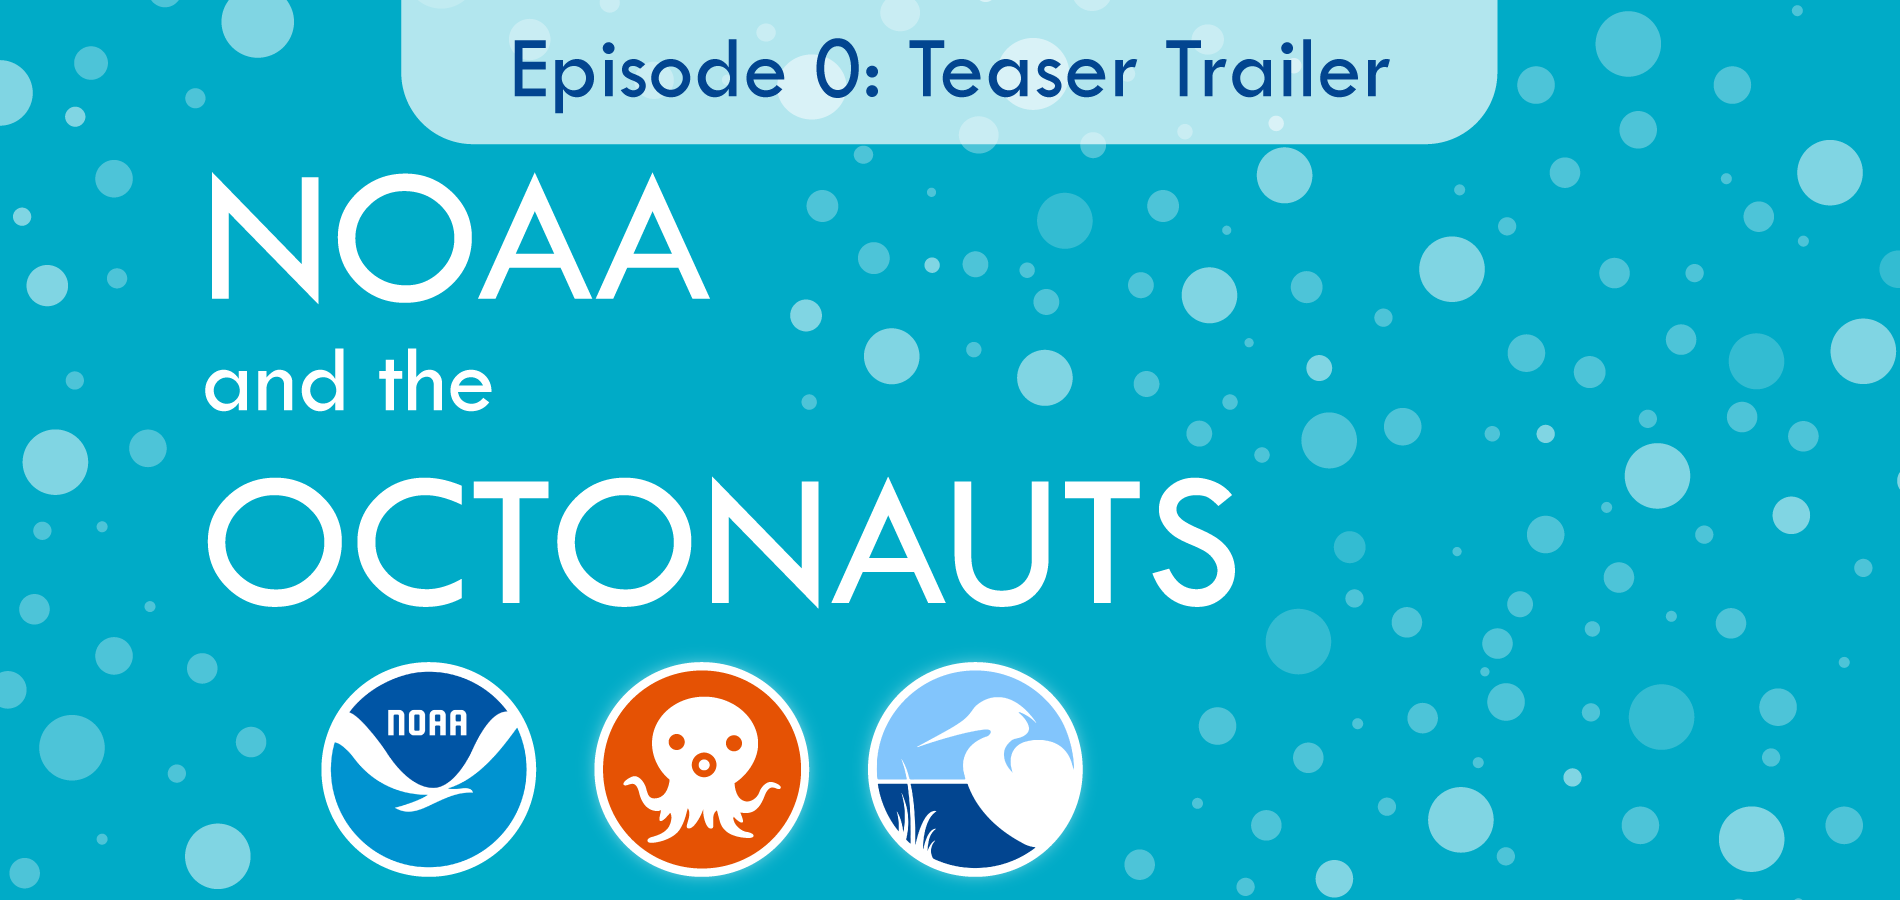 Bubbles emerge from the words “NOAA and the Octonauts.” Below the words are three logos: a blue circle with a gull-like bird in the center for NOAA, a white octopus in an orange circle for the Octonauts, and a heron silhouette against a blue background for the Coastal Ecosystem Learning Center Network.